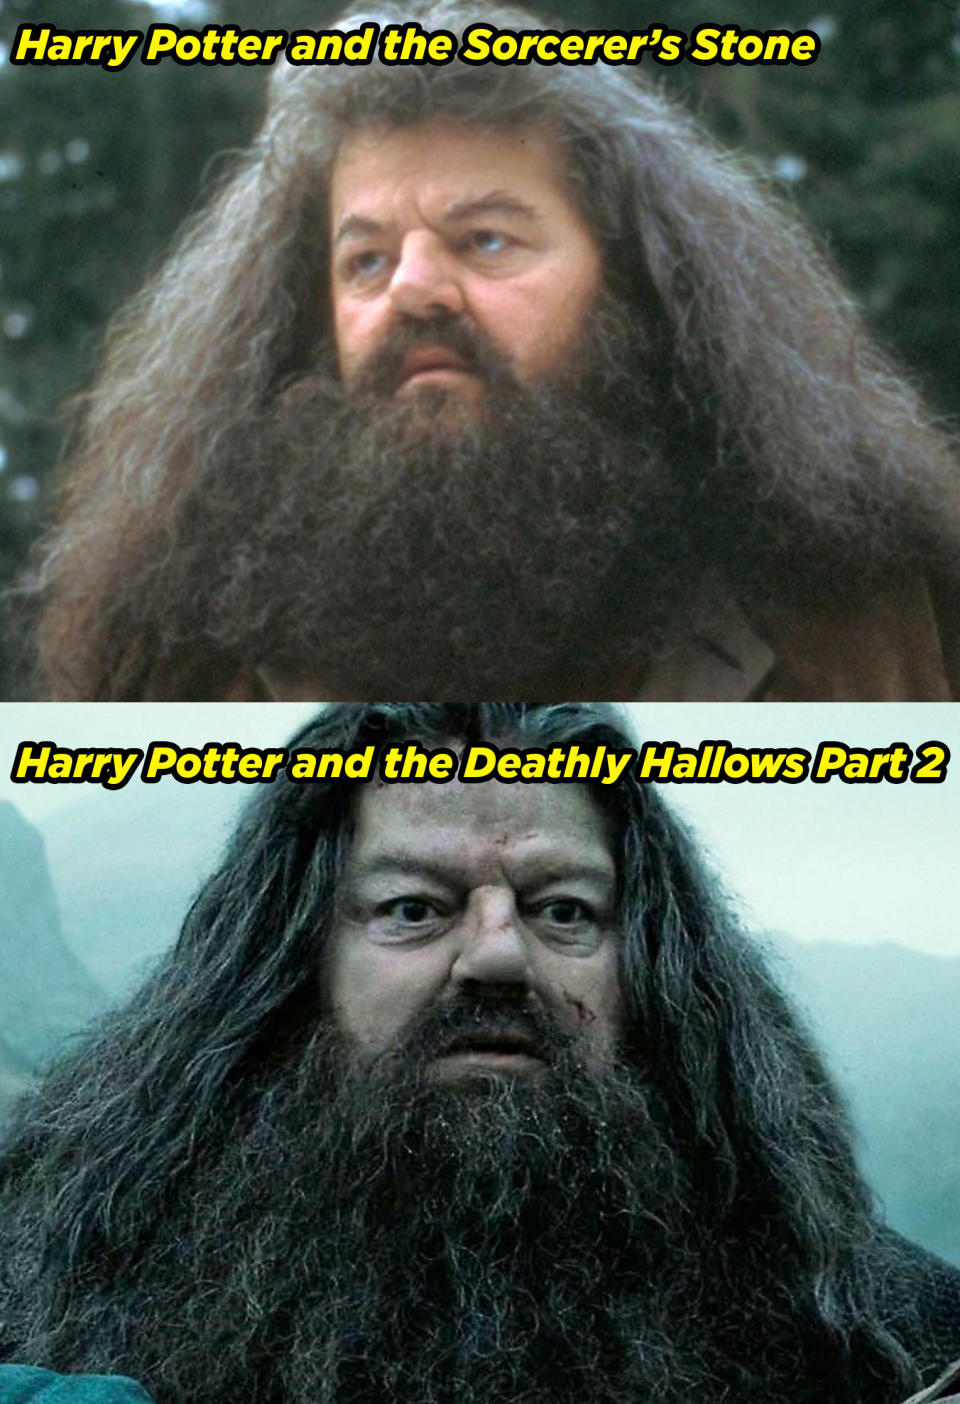 Robbie Coltrane in the Sorcerer's Stone and Deathly Hallows Part 2